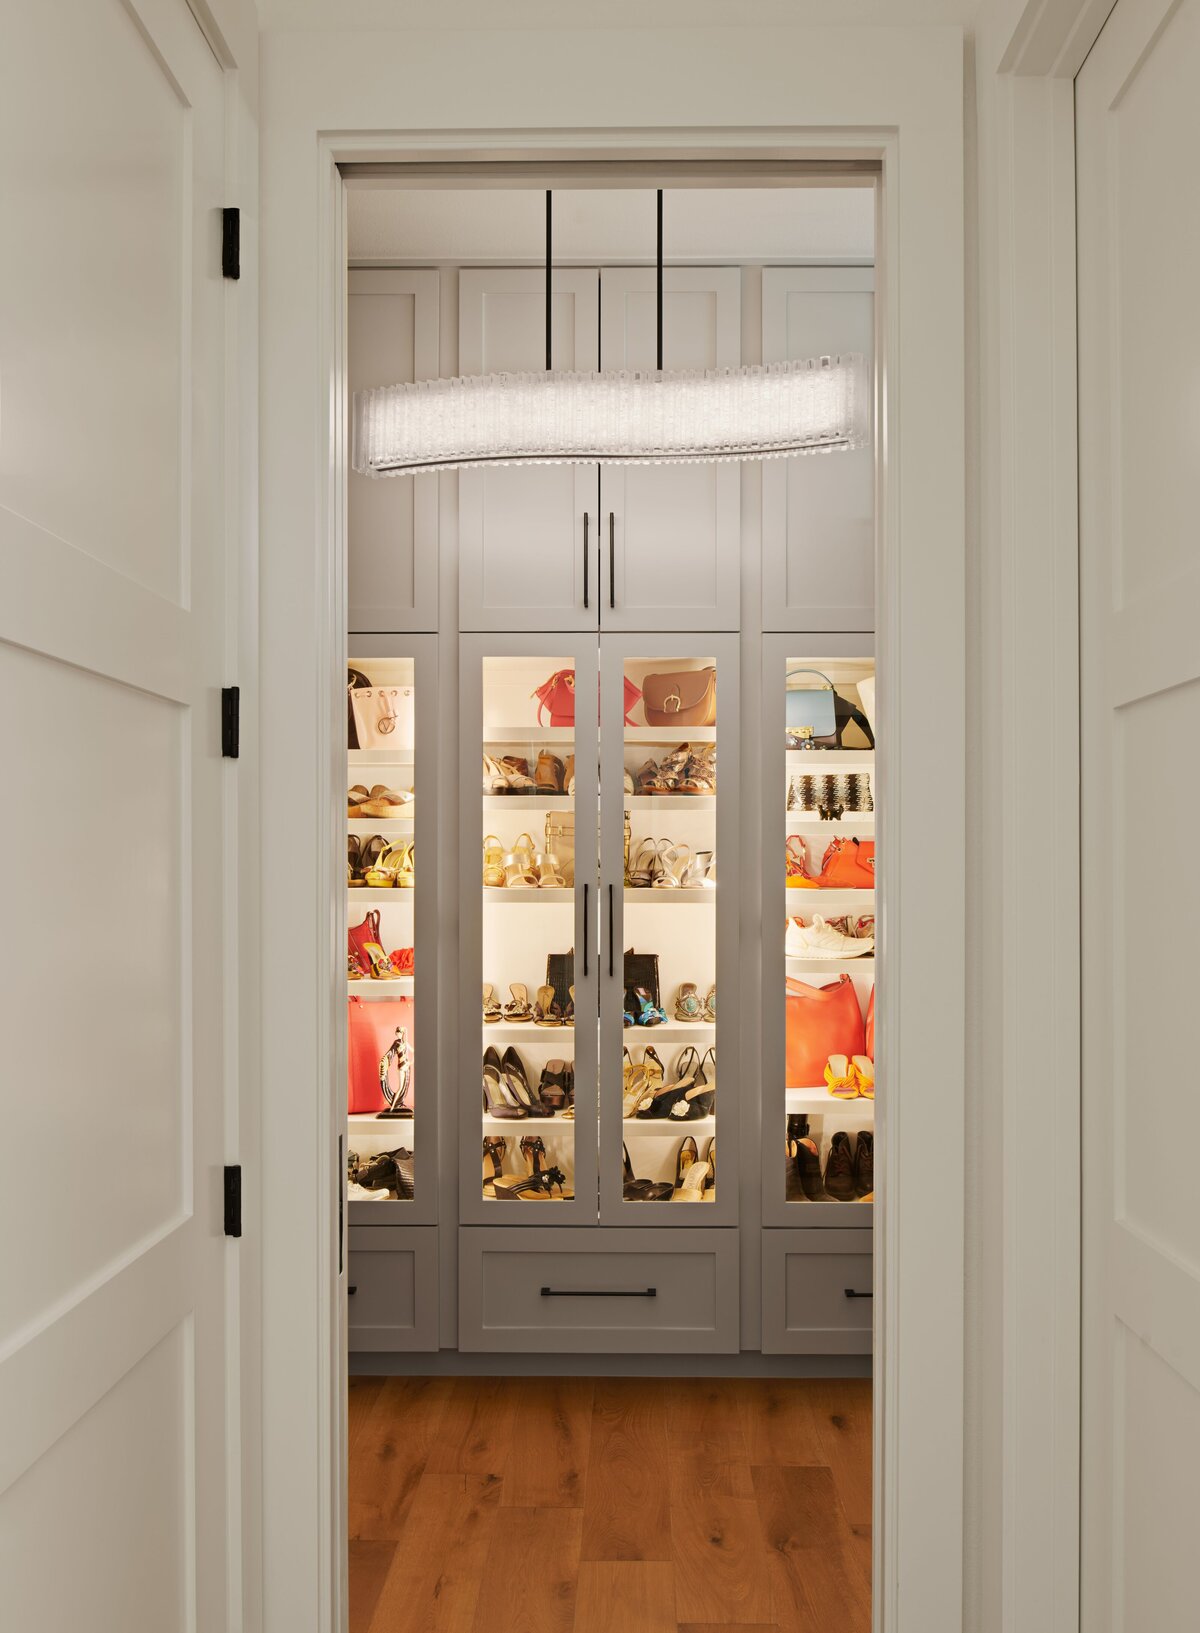 walk in closet with custom shoe shelves and special closet lighting in modern home in austin, texas